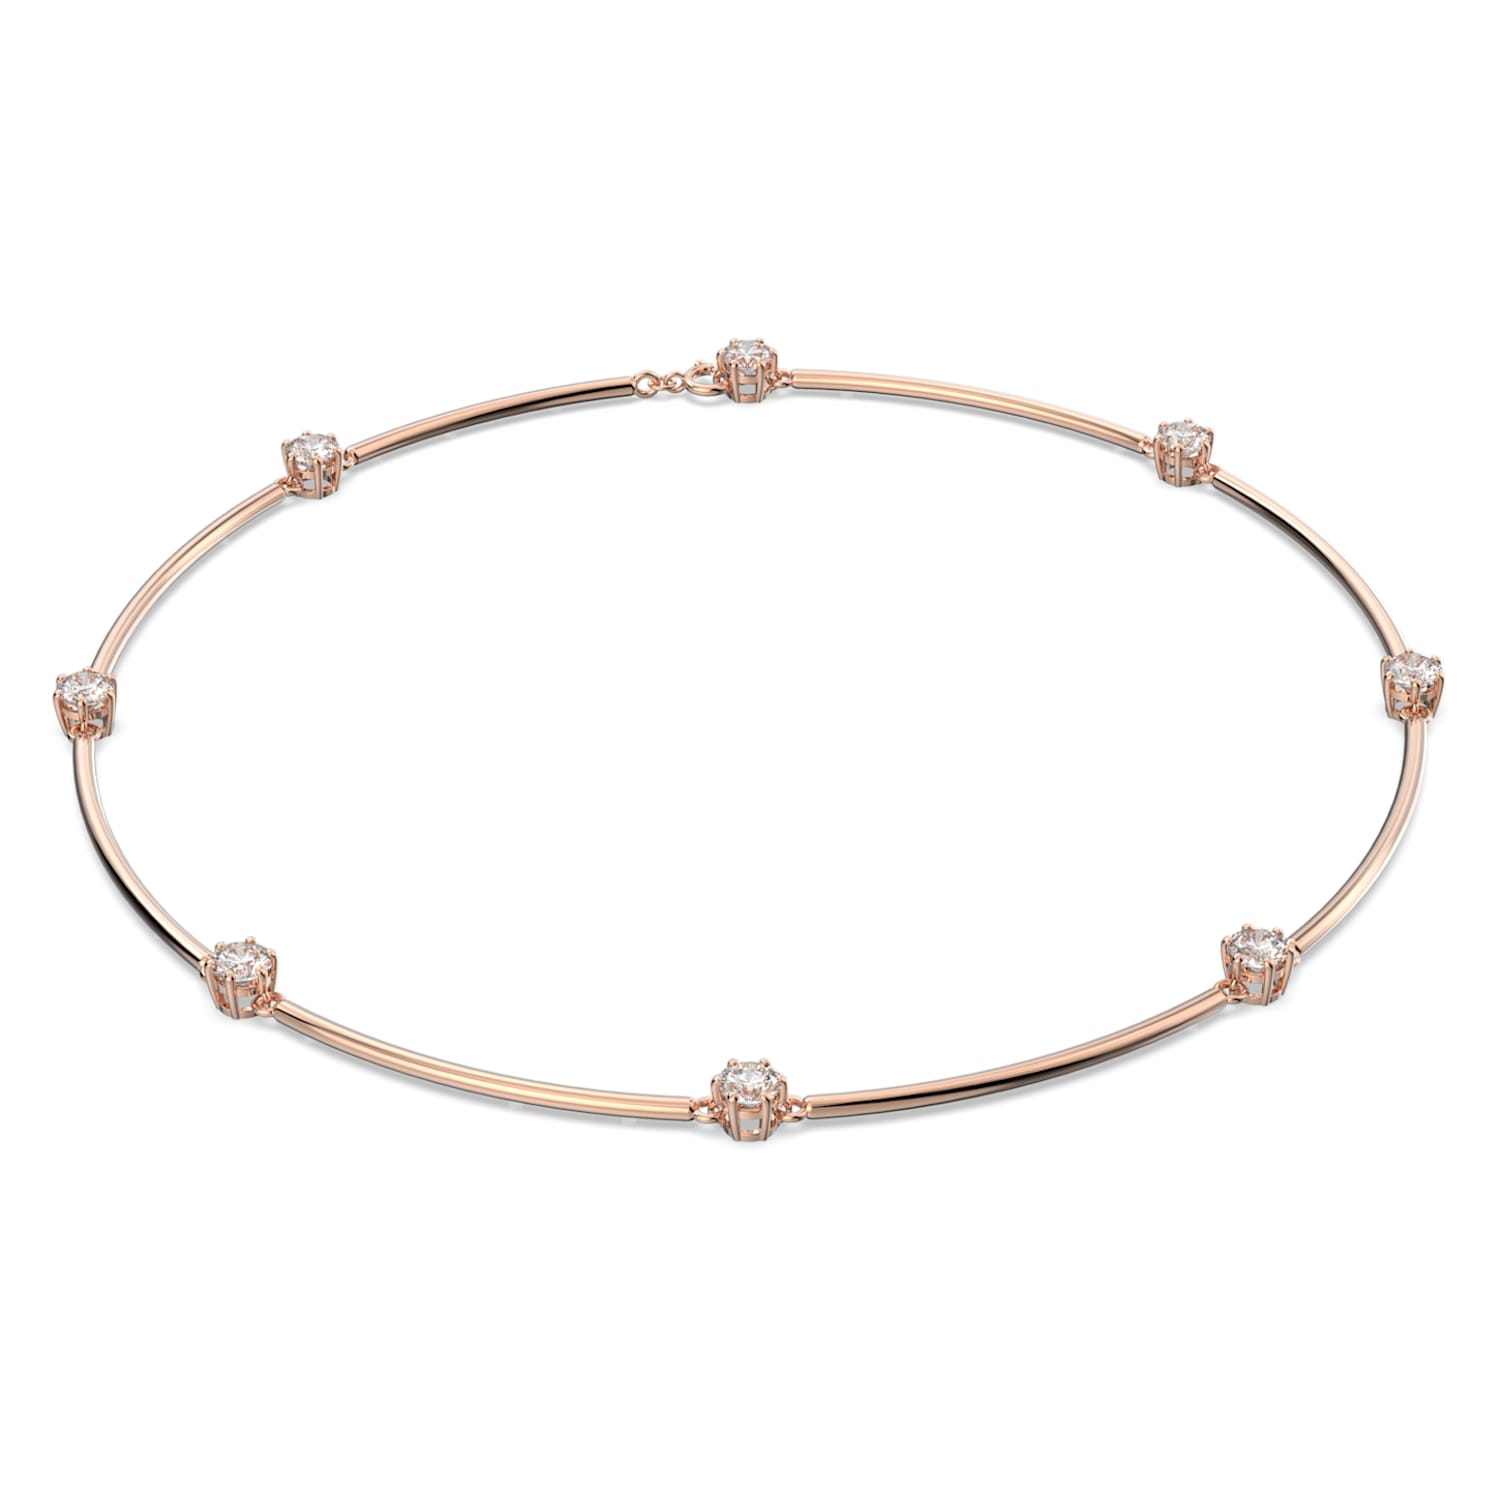 Constella necklace, Round cut, White, Rose gold-tone plated